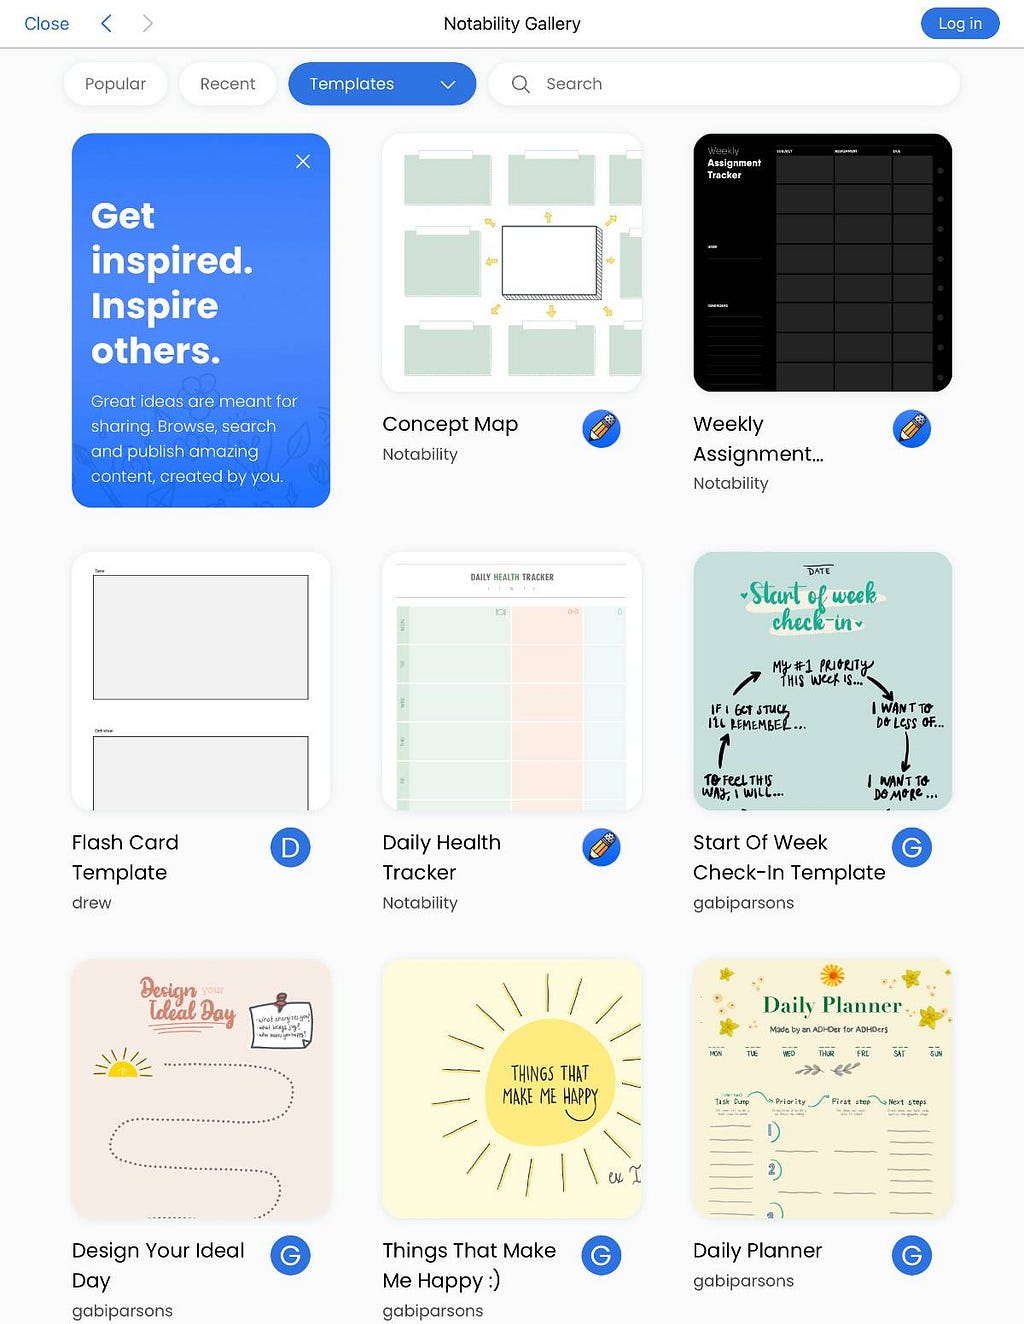 The Notability Gallery, filtered to show shared notes that have been tagged as “Templates.” Visible templates include a Concept Map, a Daily Health Tracker, etc.